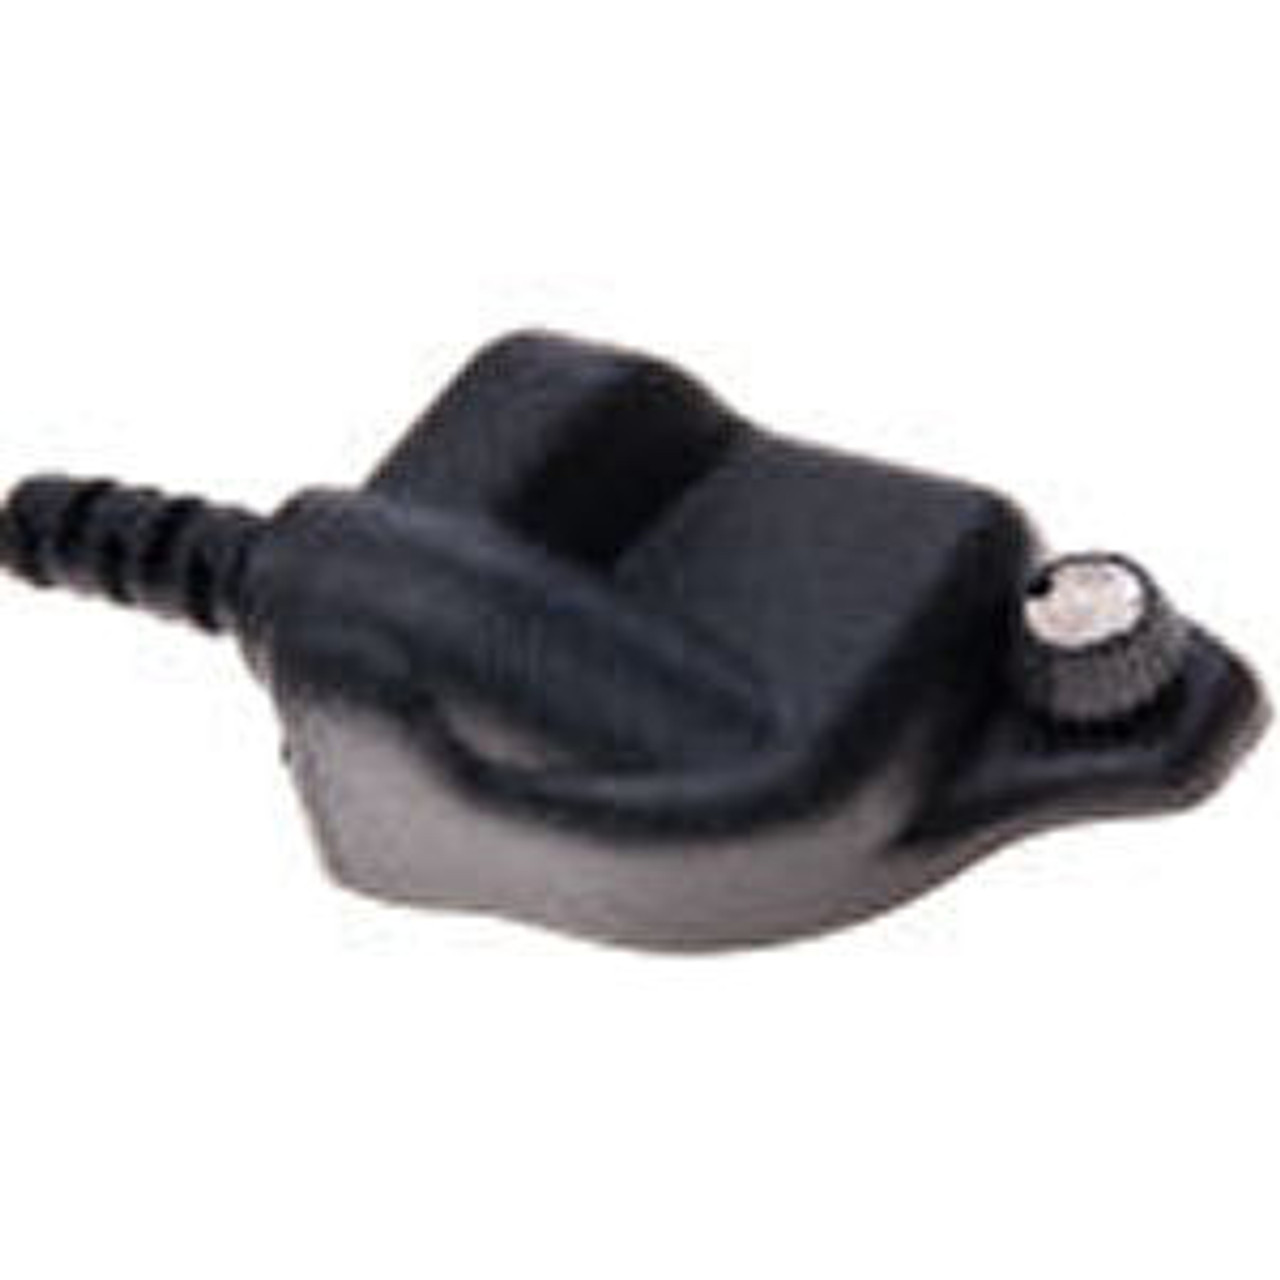 TAC 1 Systems IP67 E-Button Mic. Replaces Harris part number MAEV-NAE9D